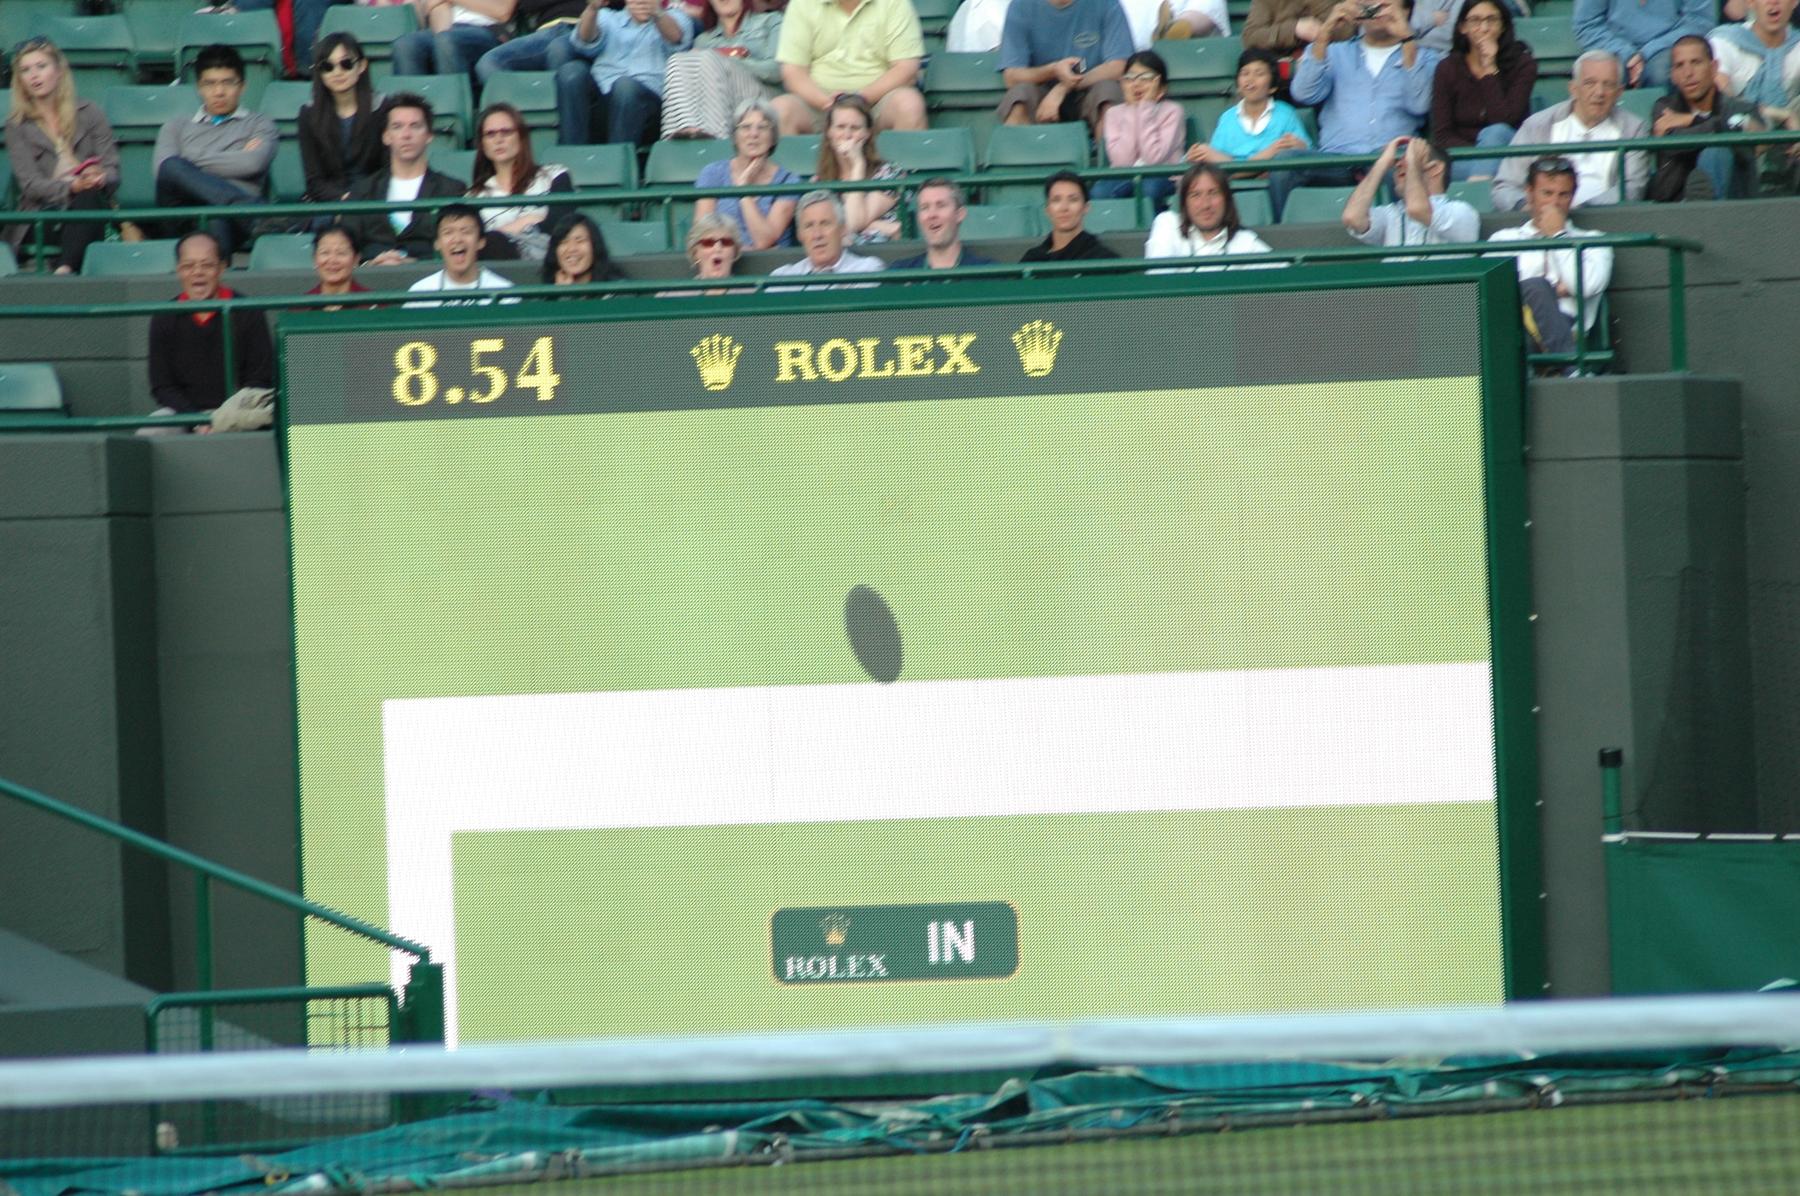 File:The decision of In or Out with the help of Technology at Wimbledon.jpg - Image of Technology, A